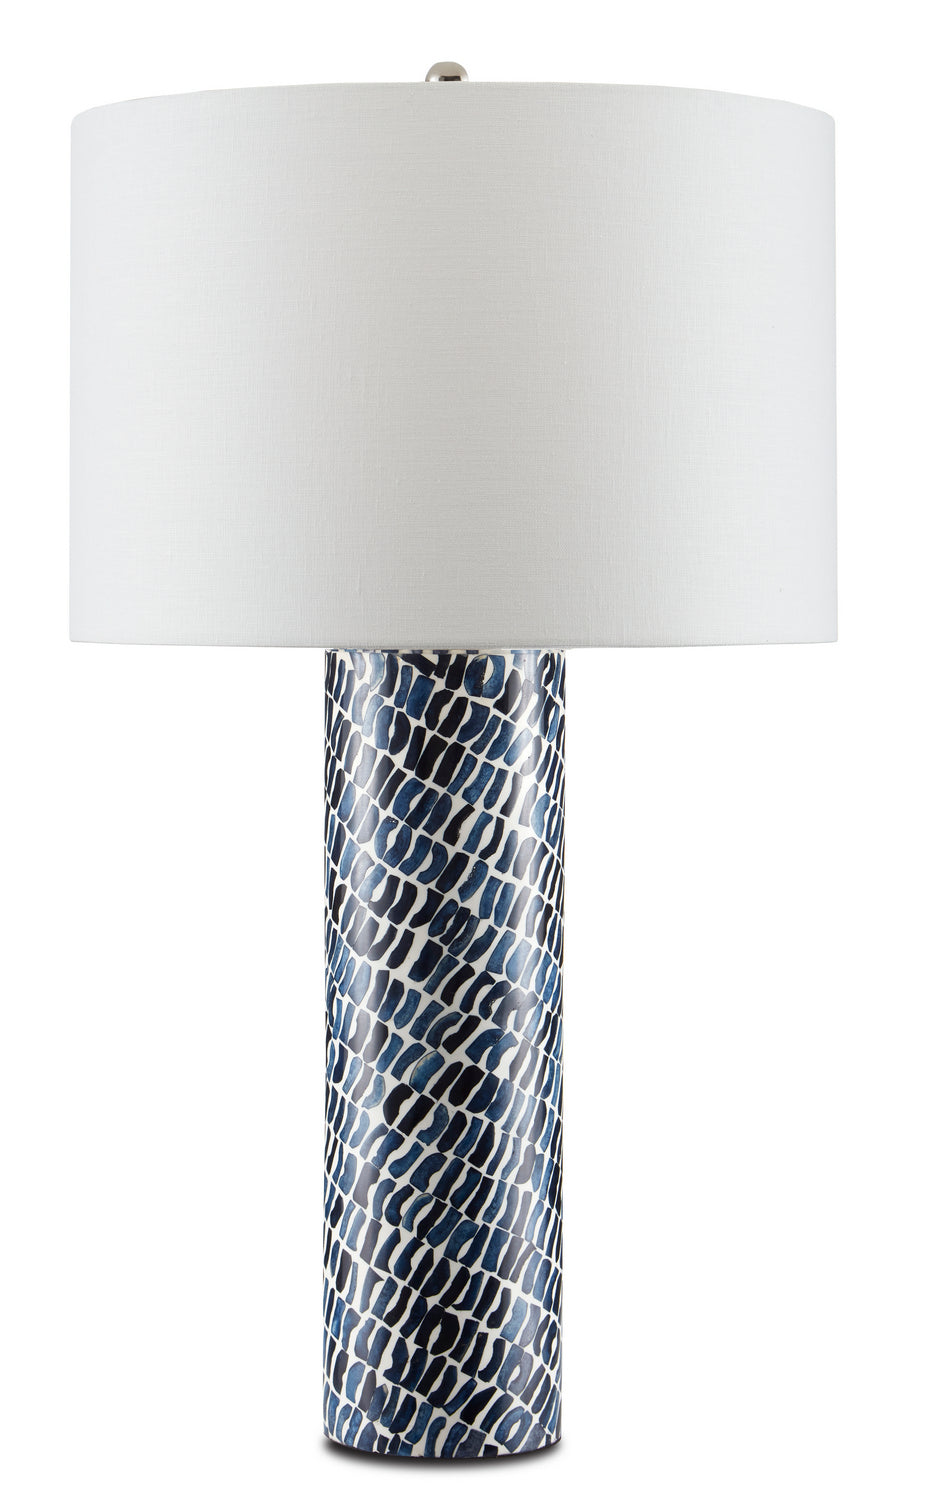 One Light Table Lamp from the Indigo collection in Blue/White finish